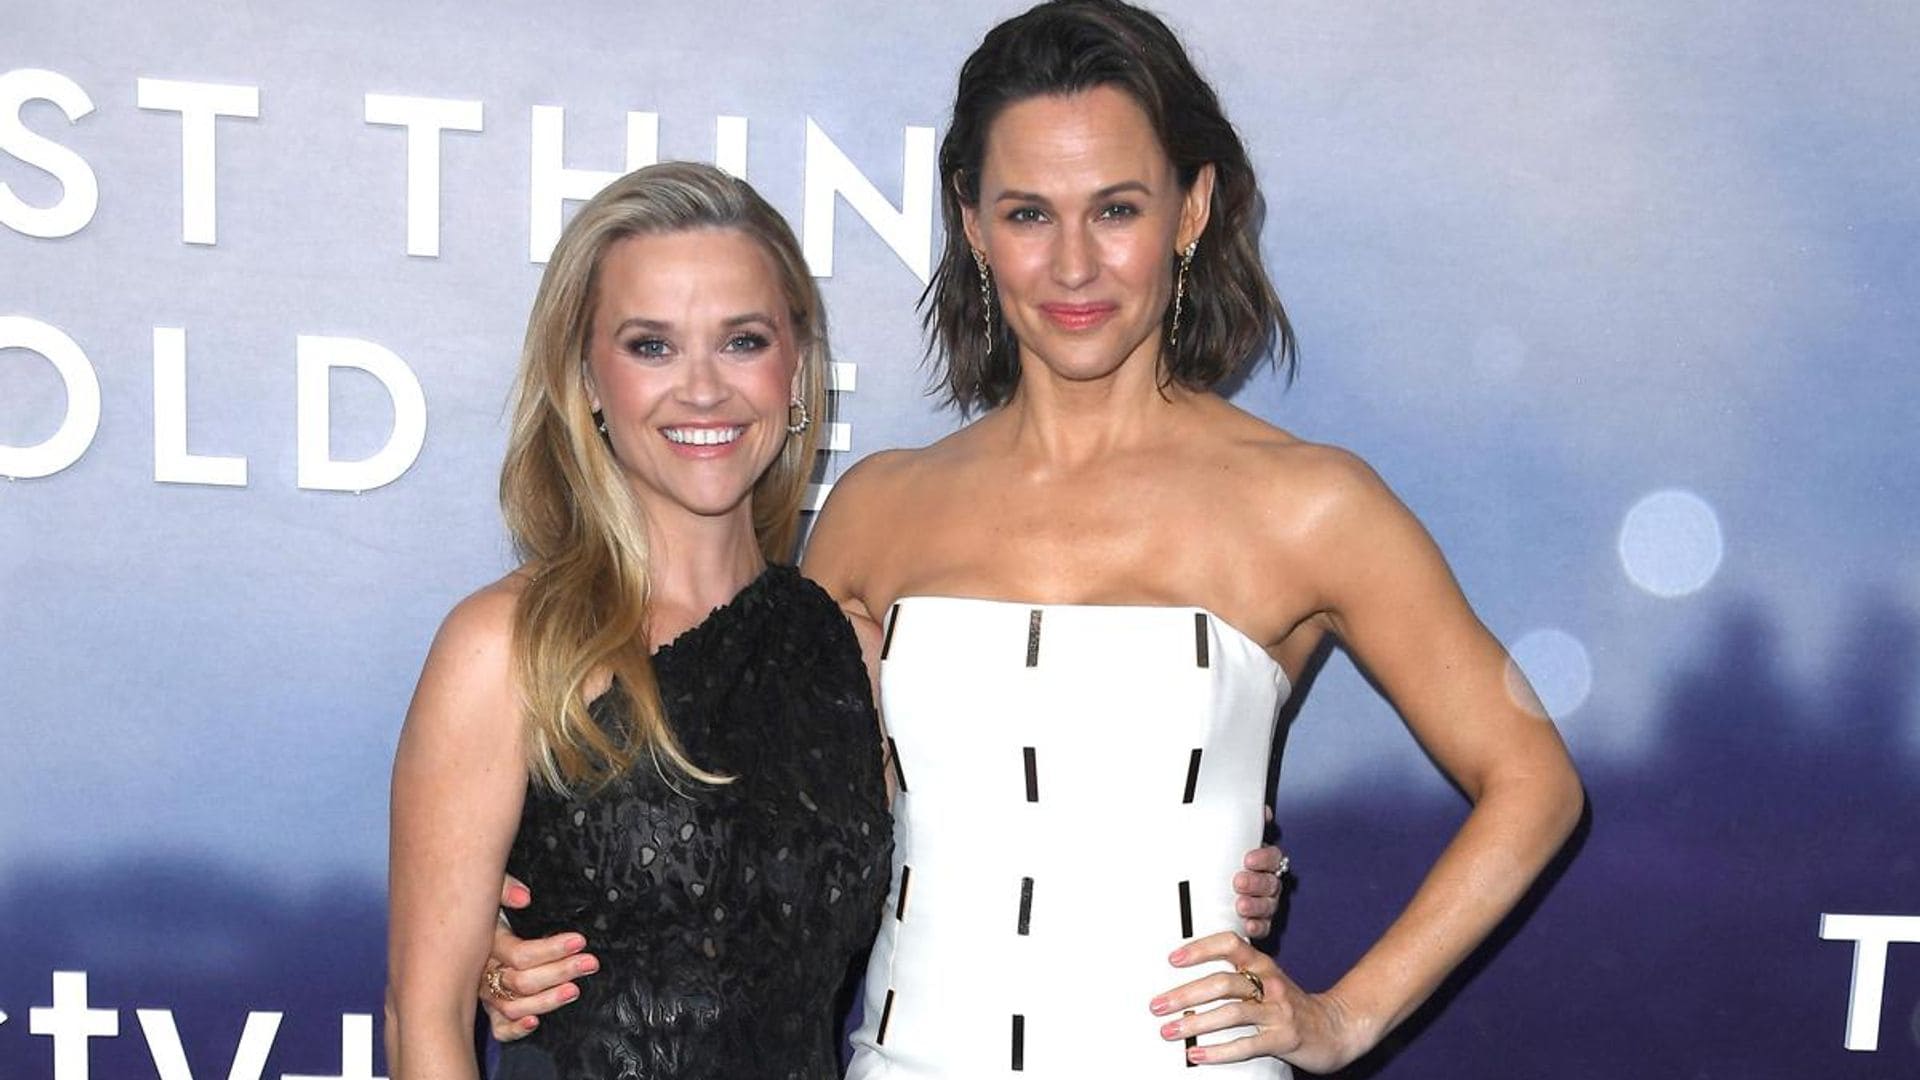 Jennifer Garner celebrates Reese Witherspoon’s birthday with a sax solo